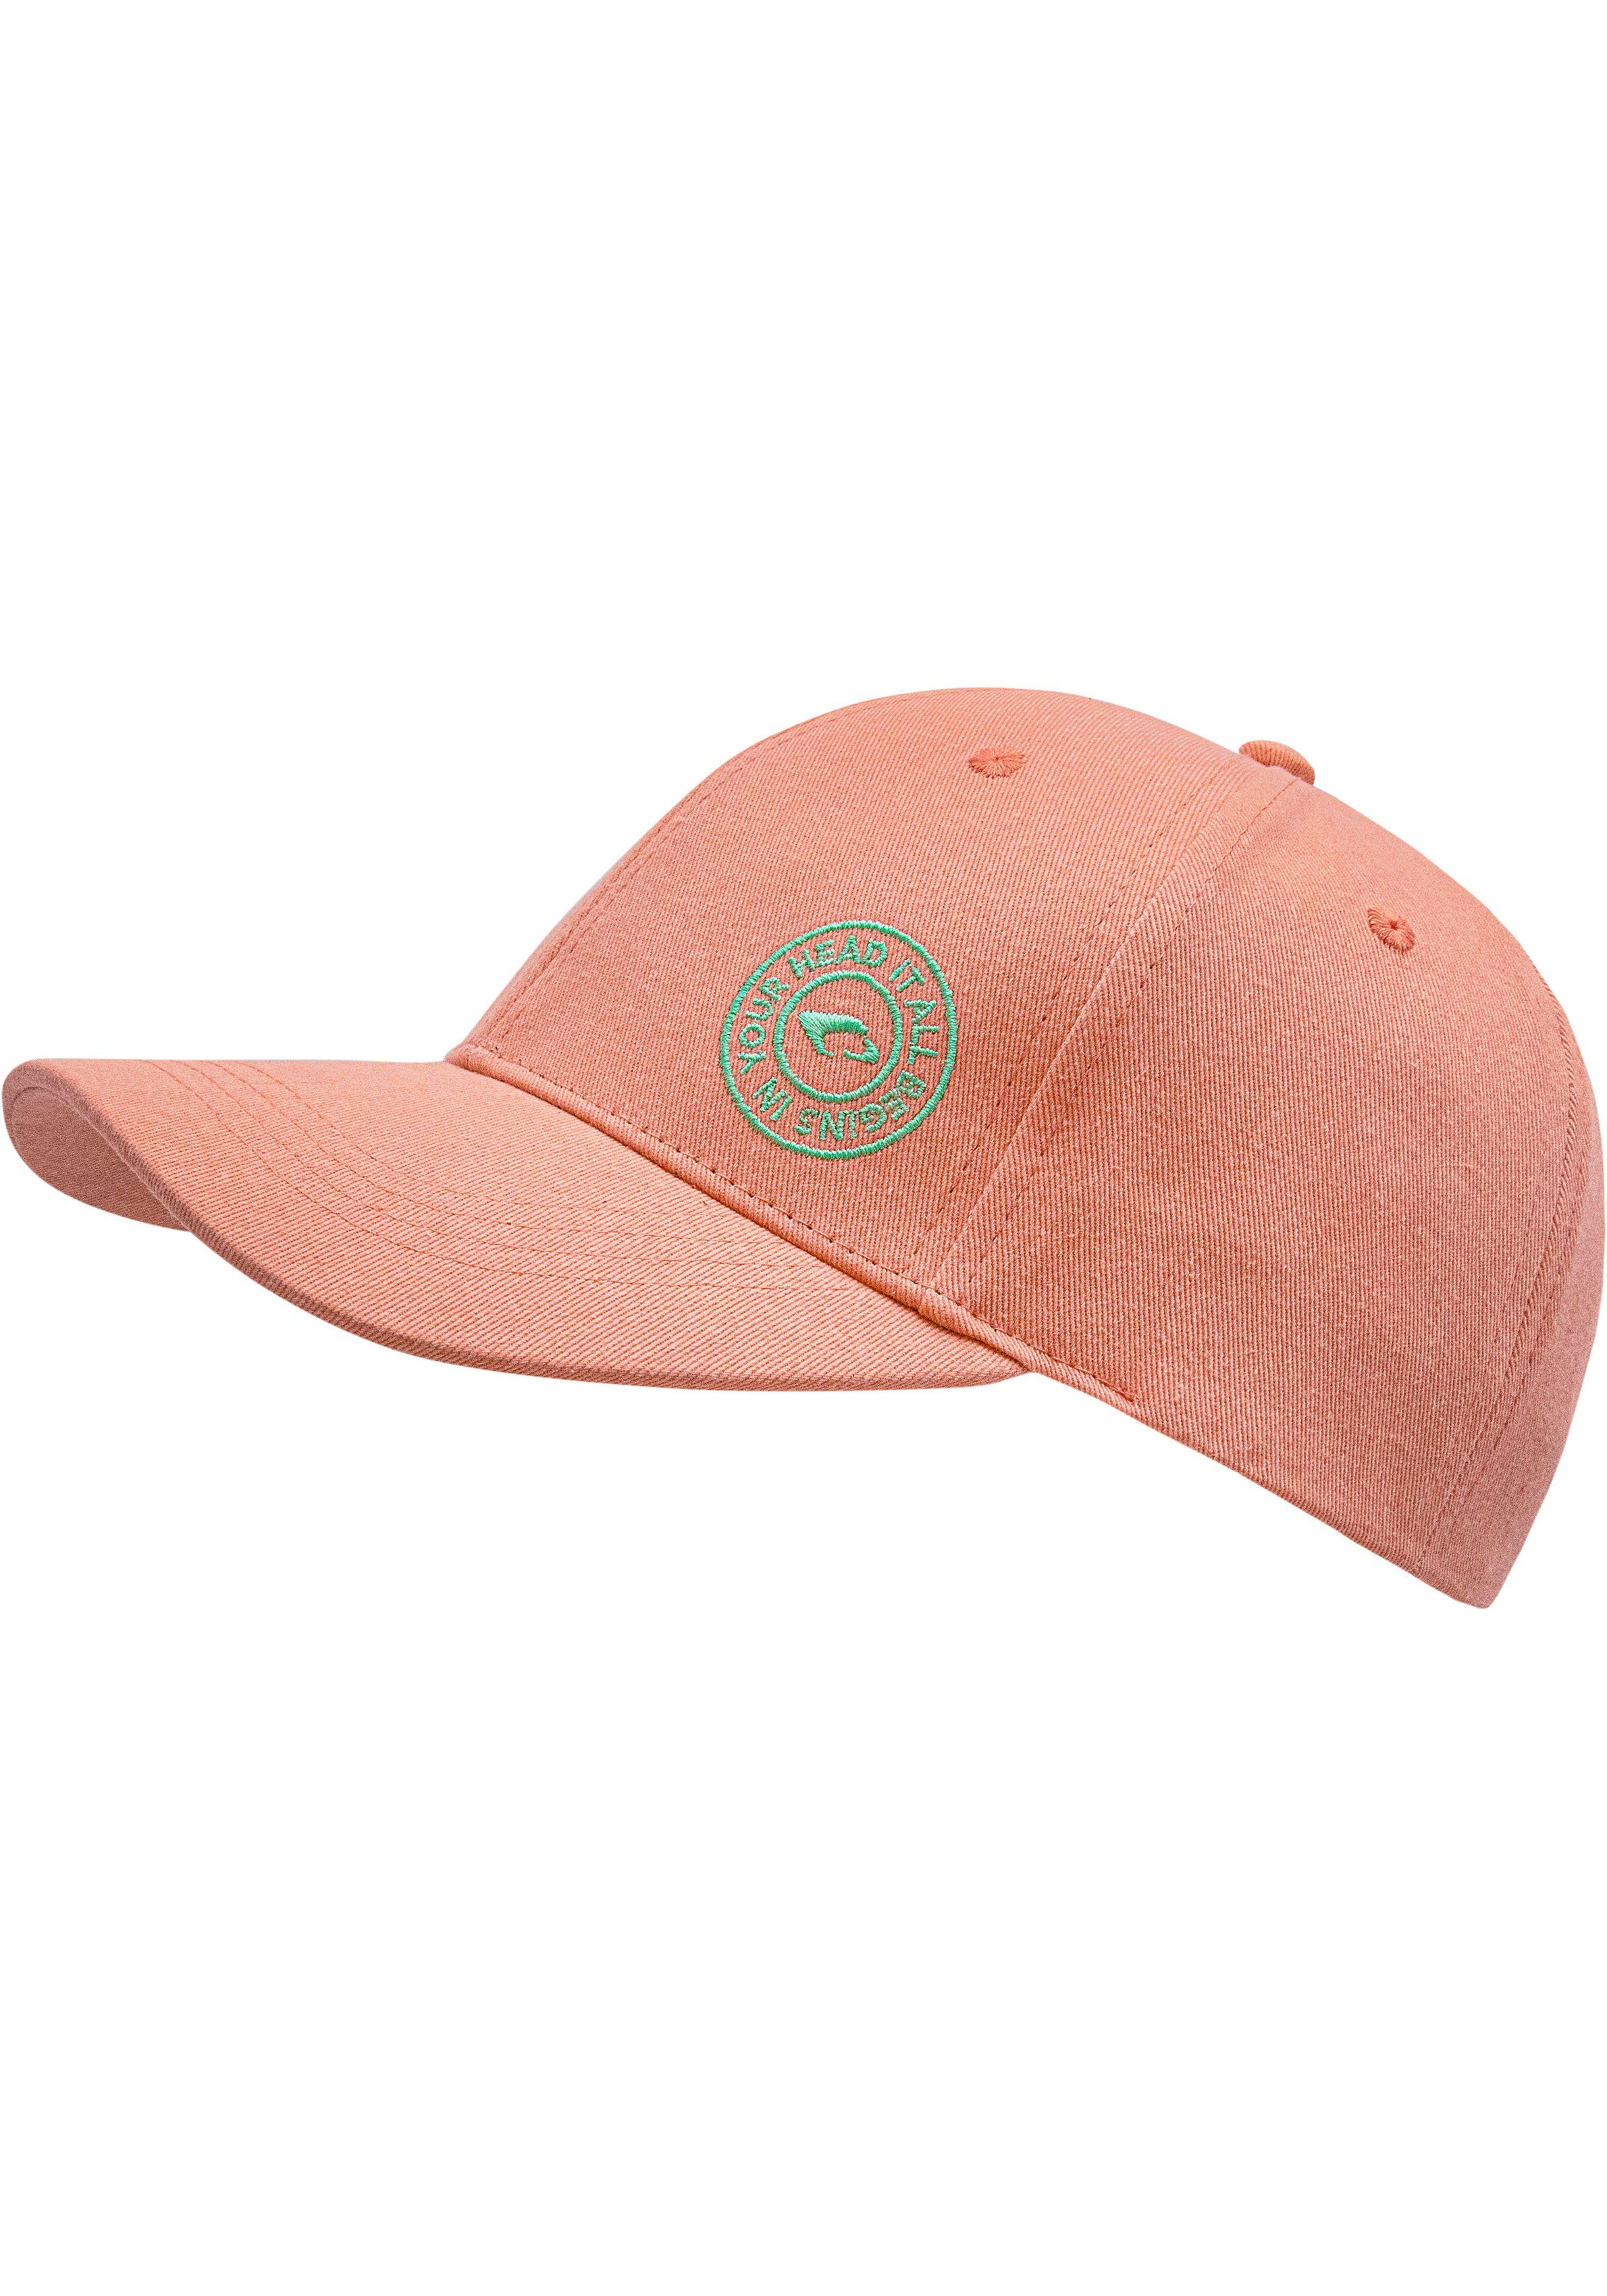 chillouts Baseball Arklow Cap Hat coral